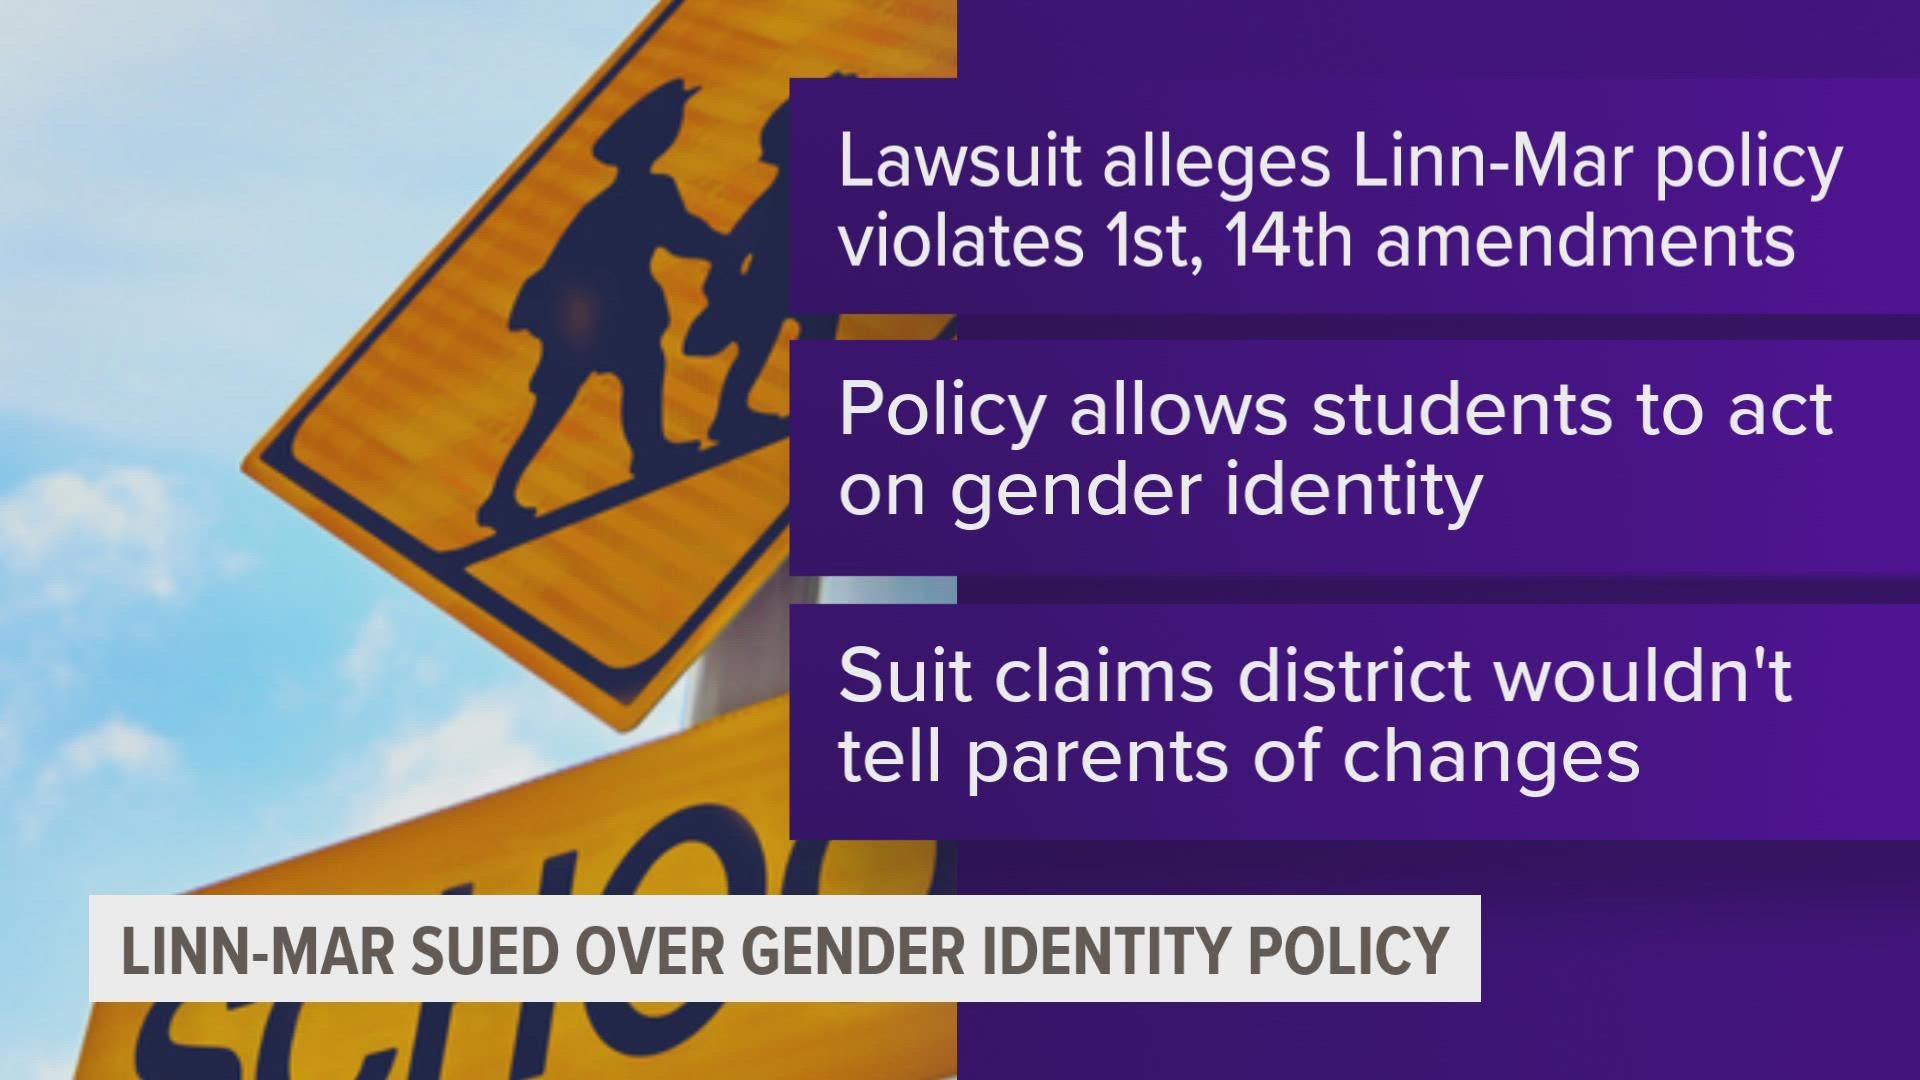 The lawsuit alleges the Linn-Mar schools' administrative regulations violate the first and 14th amendments.